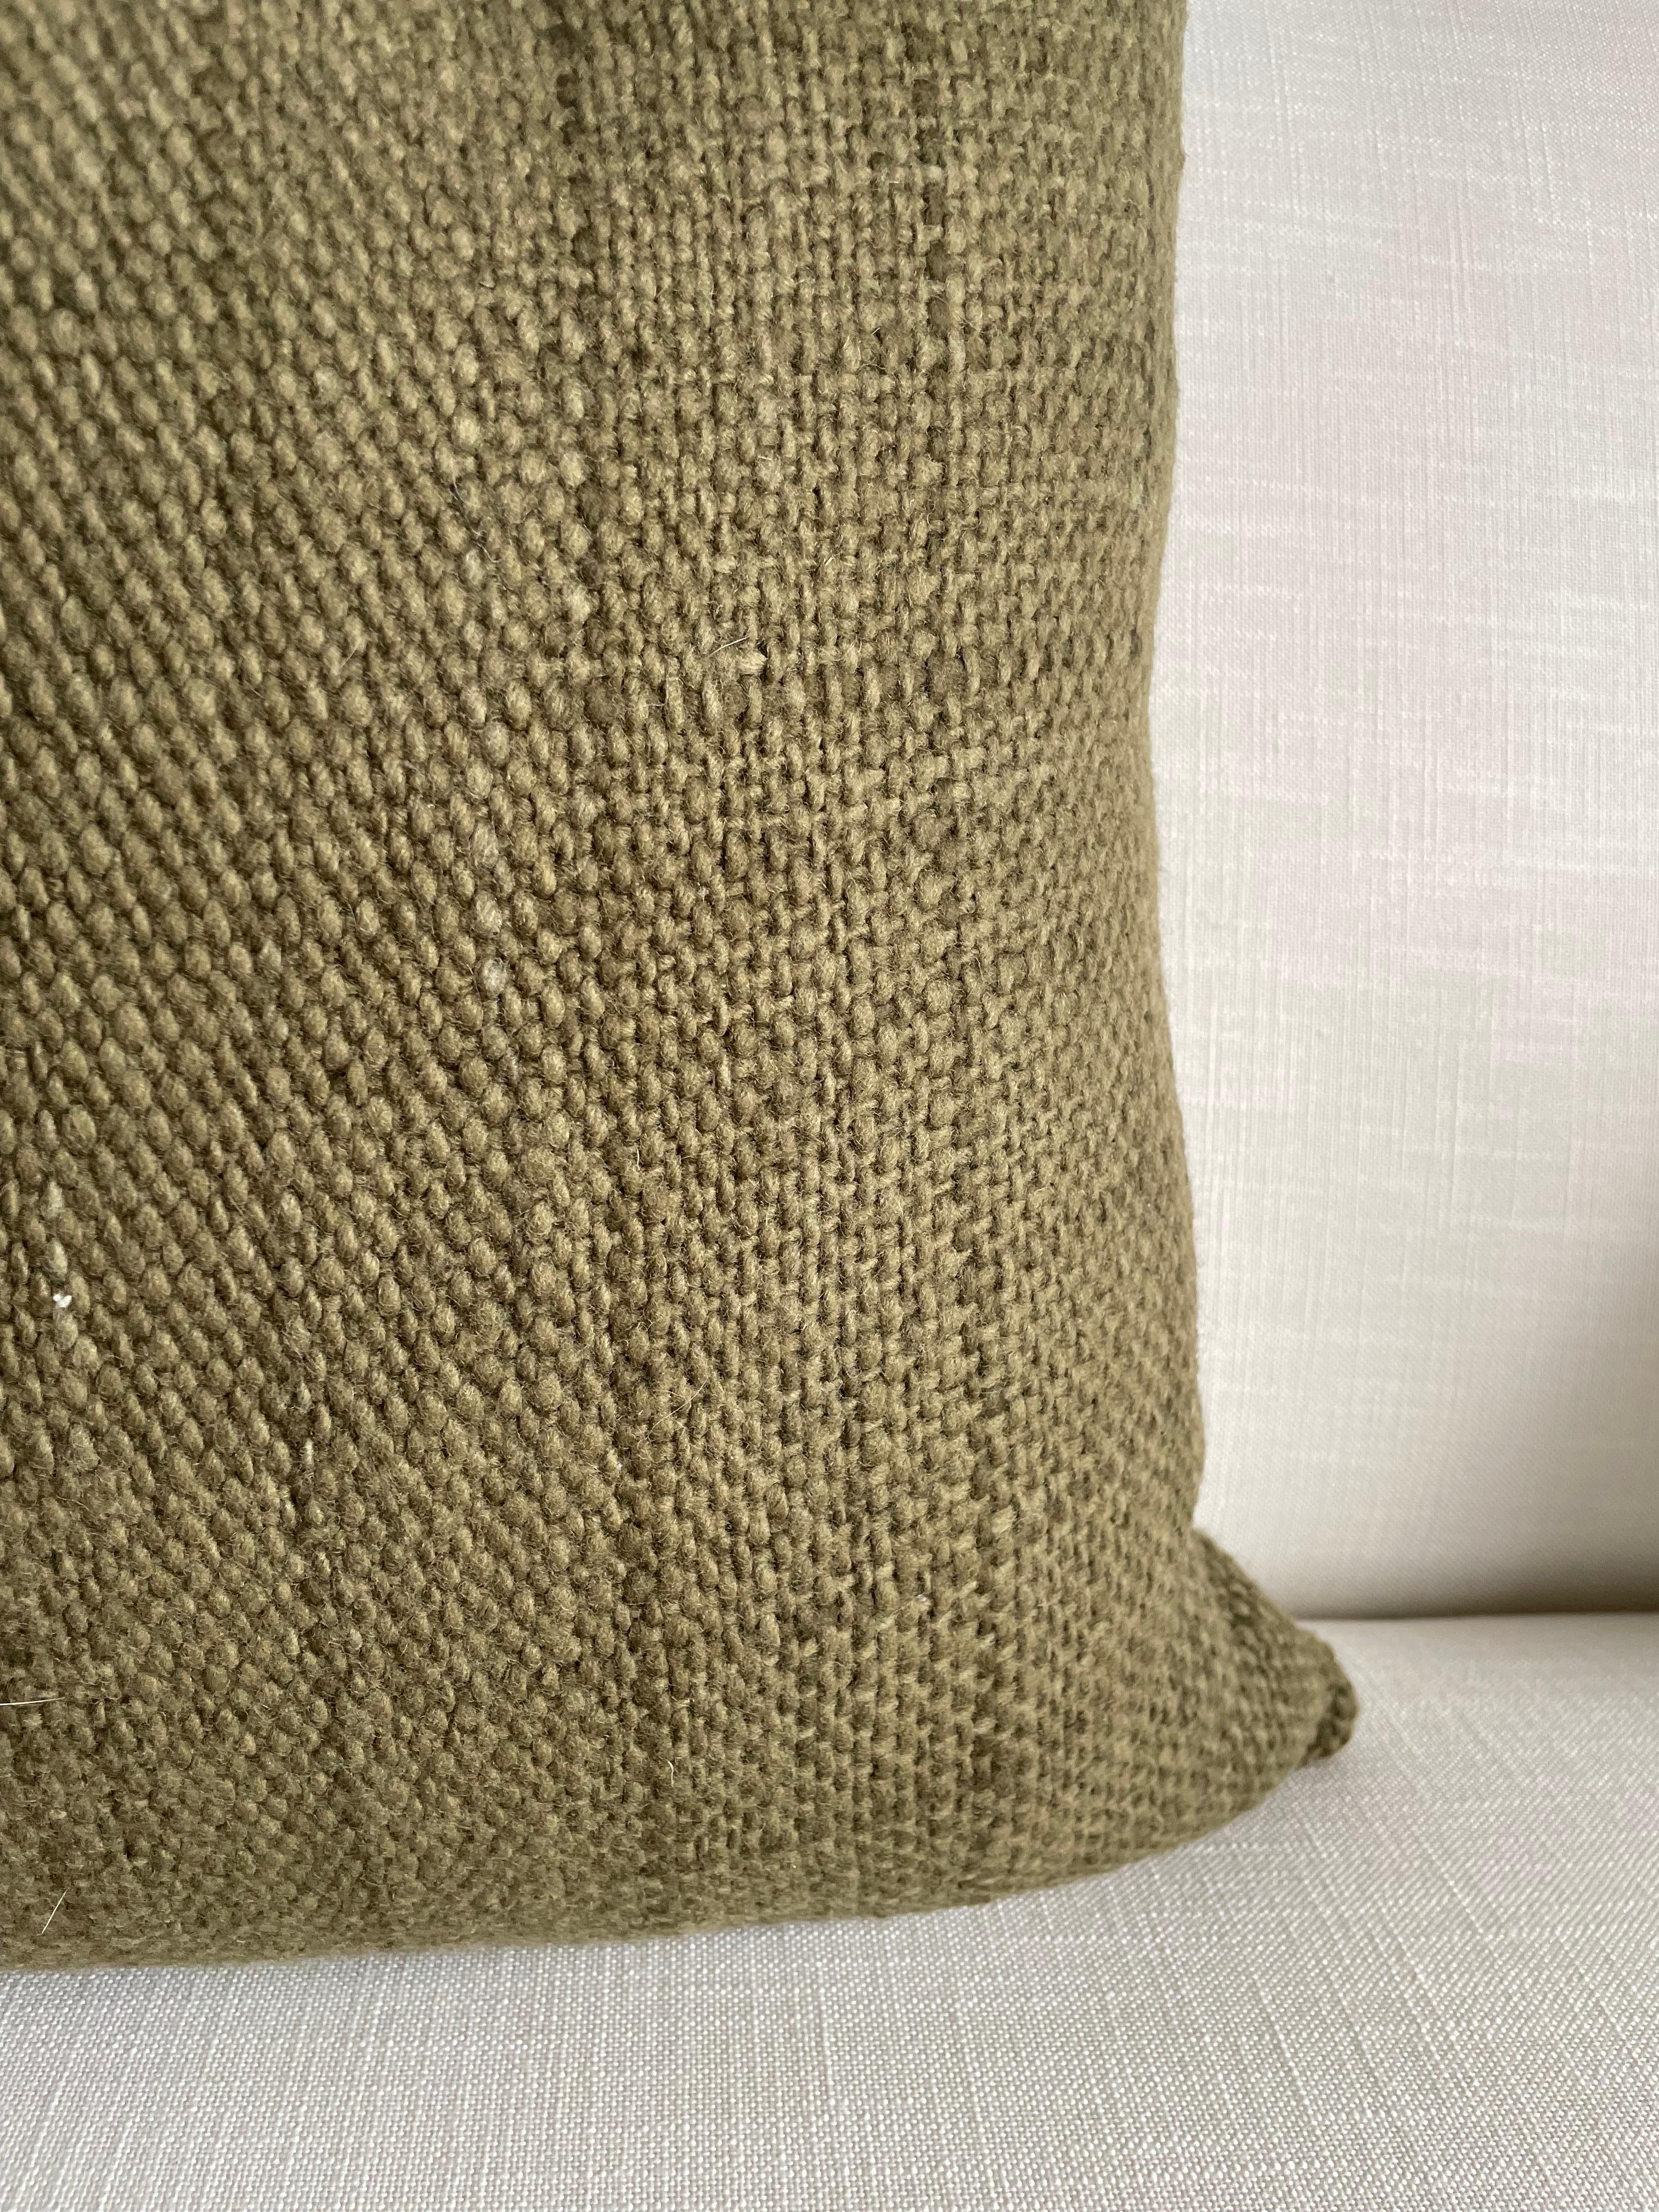 A beautiful moss green woven wool pillow that is soft to the touch.
Zipper Closure. 
Hand spun and woven by female artisans in Chile on traditional back-strap looms, these cushions make a beautiful statement accent for the living room or bed.